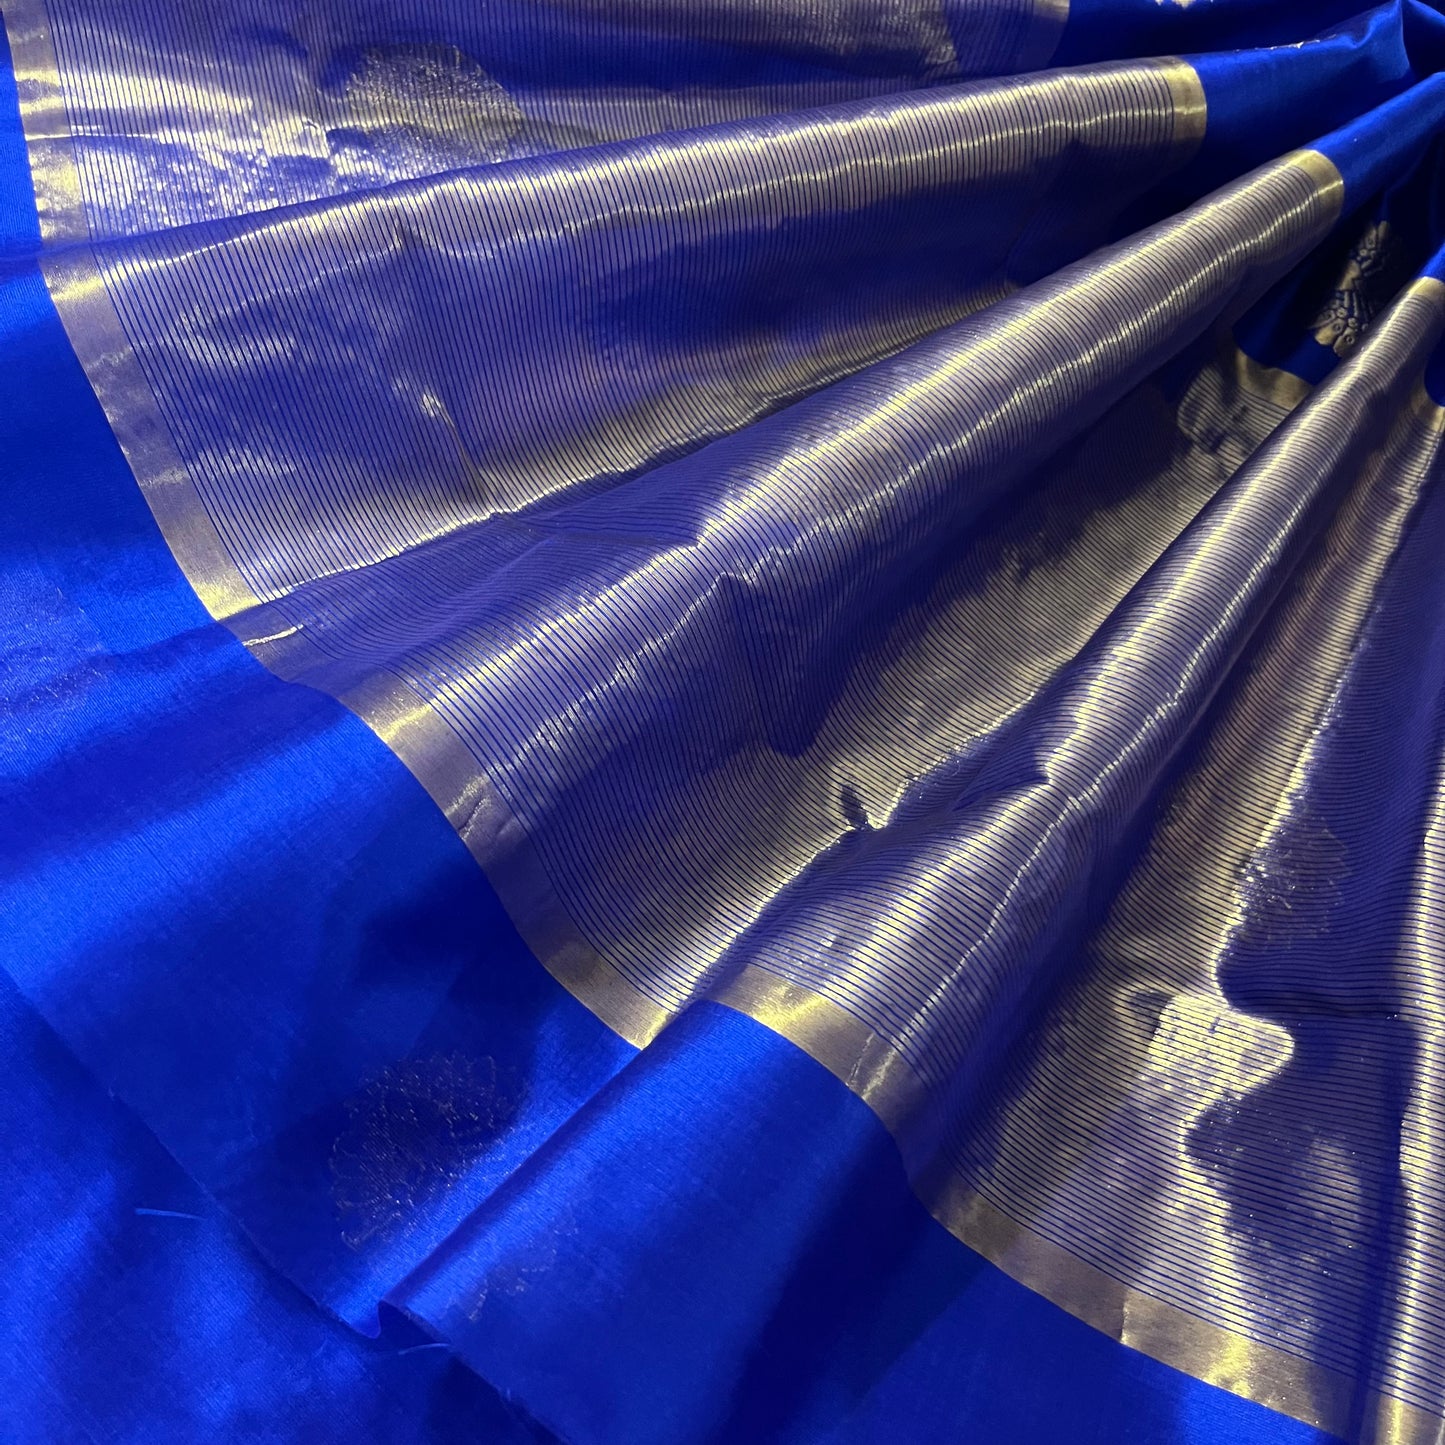 Royal blue chanderi silk saree with mor-motifs all over